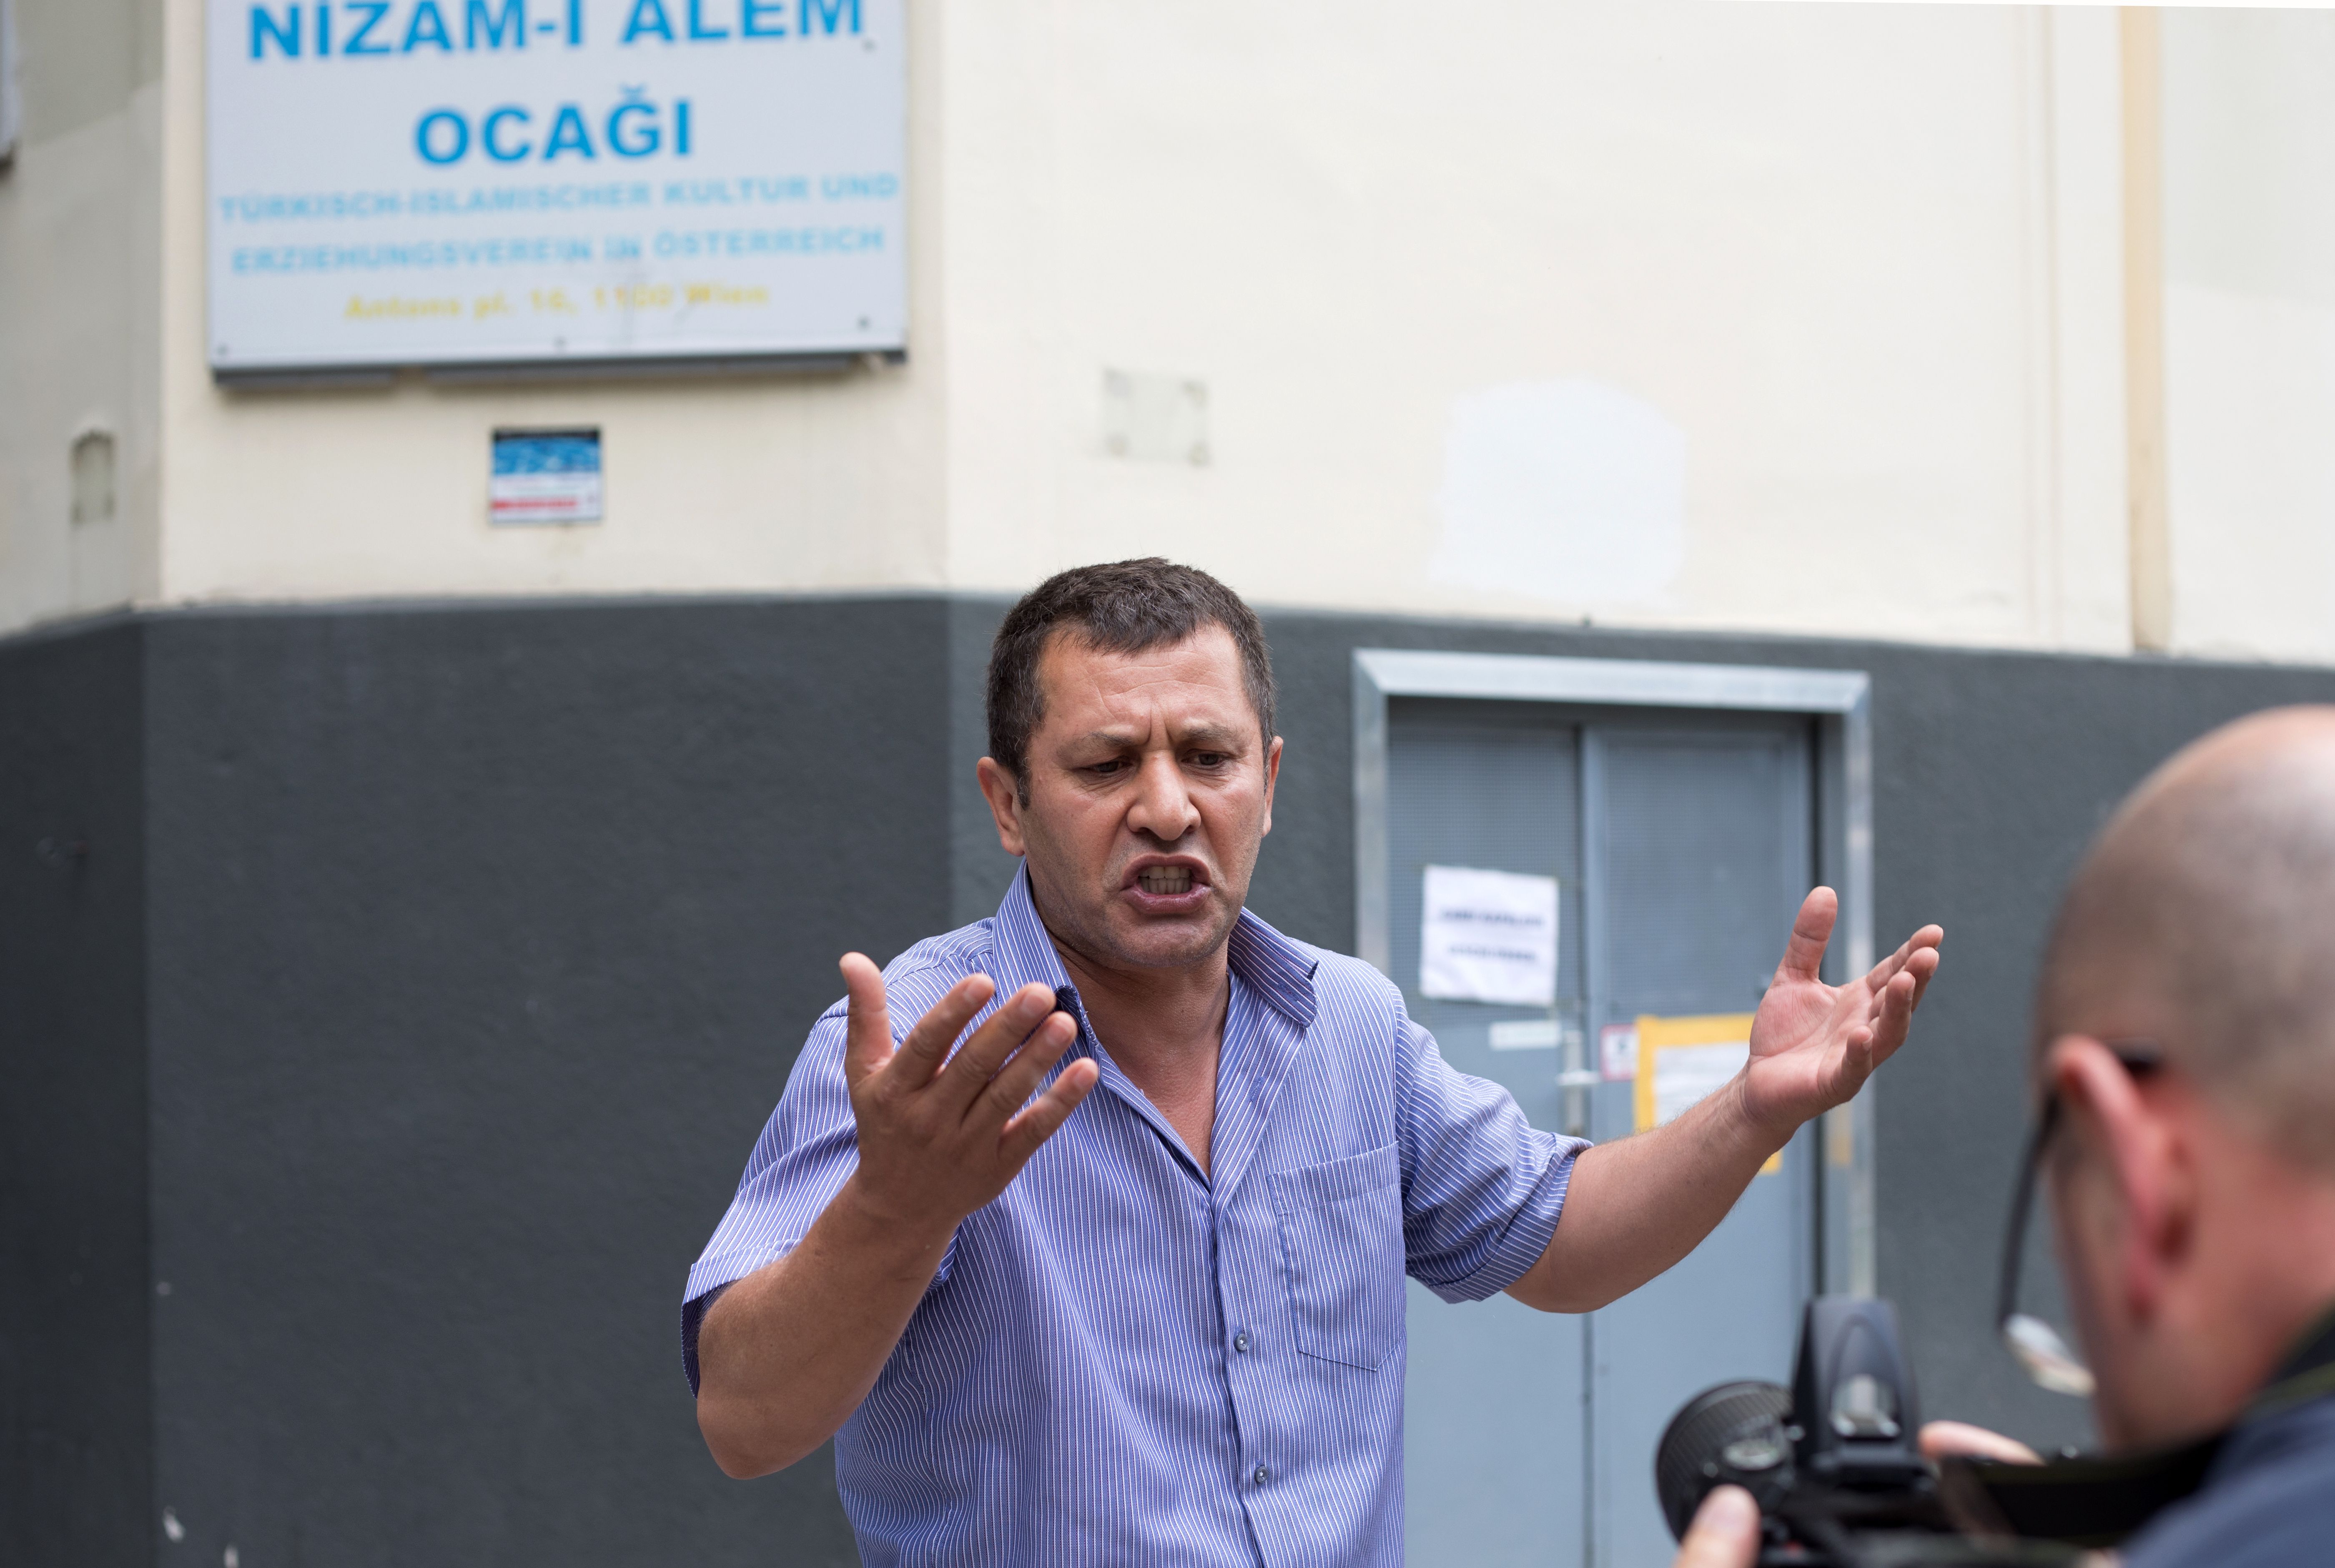 A community member gestures on June 8, 2018 in front of the "Nizam-i Alem" mosque in Vienna after it was closed as part of seven mosques that the Austrian government announced they would shut down. - Austria said on June 8, 2018 it could expel up to 60 Turkish-funded imams and their families and shut down seven mosques as part of a crackdown on "political Islam", triggering fury in Ankara. In total 150 people risked losing their right to residence, he said at a press conference in Vienna. (Photo by ALEX HALADA / AFP) (Photo credit should read ALEX HALADA/AFP/Getty Images)